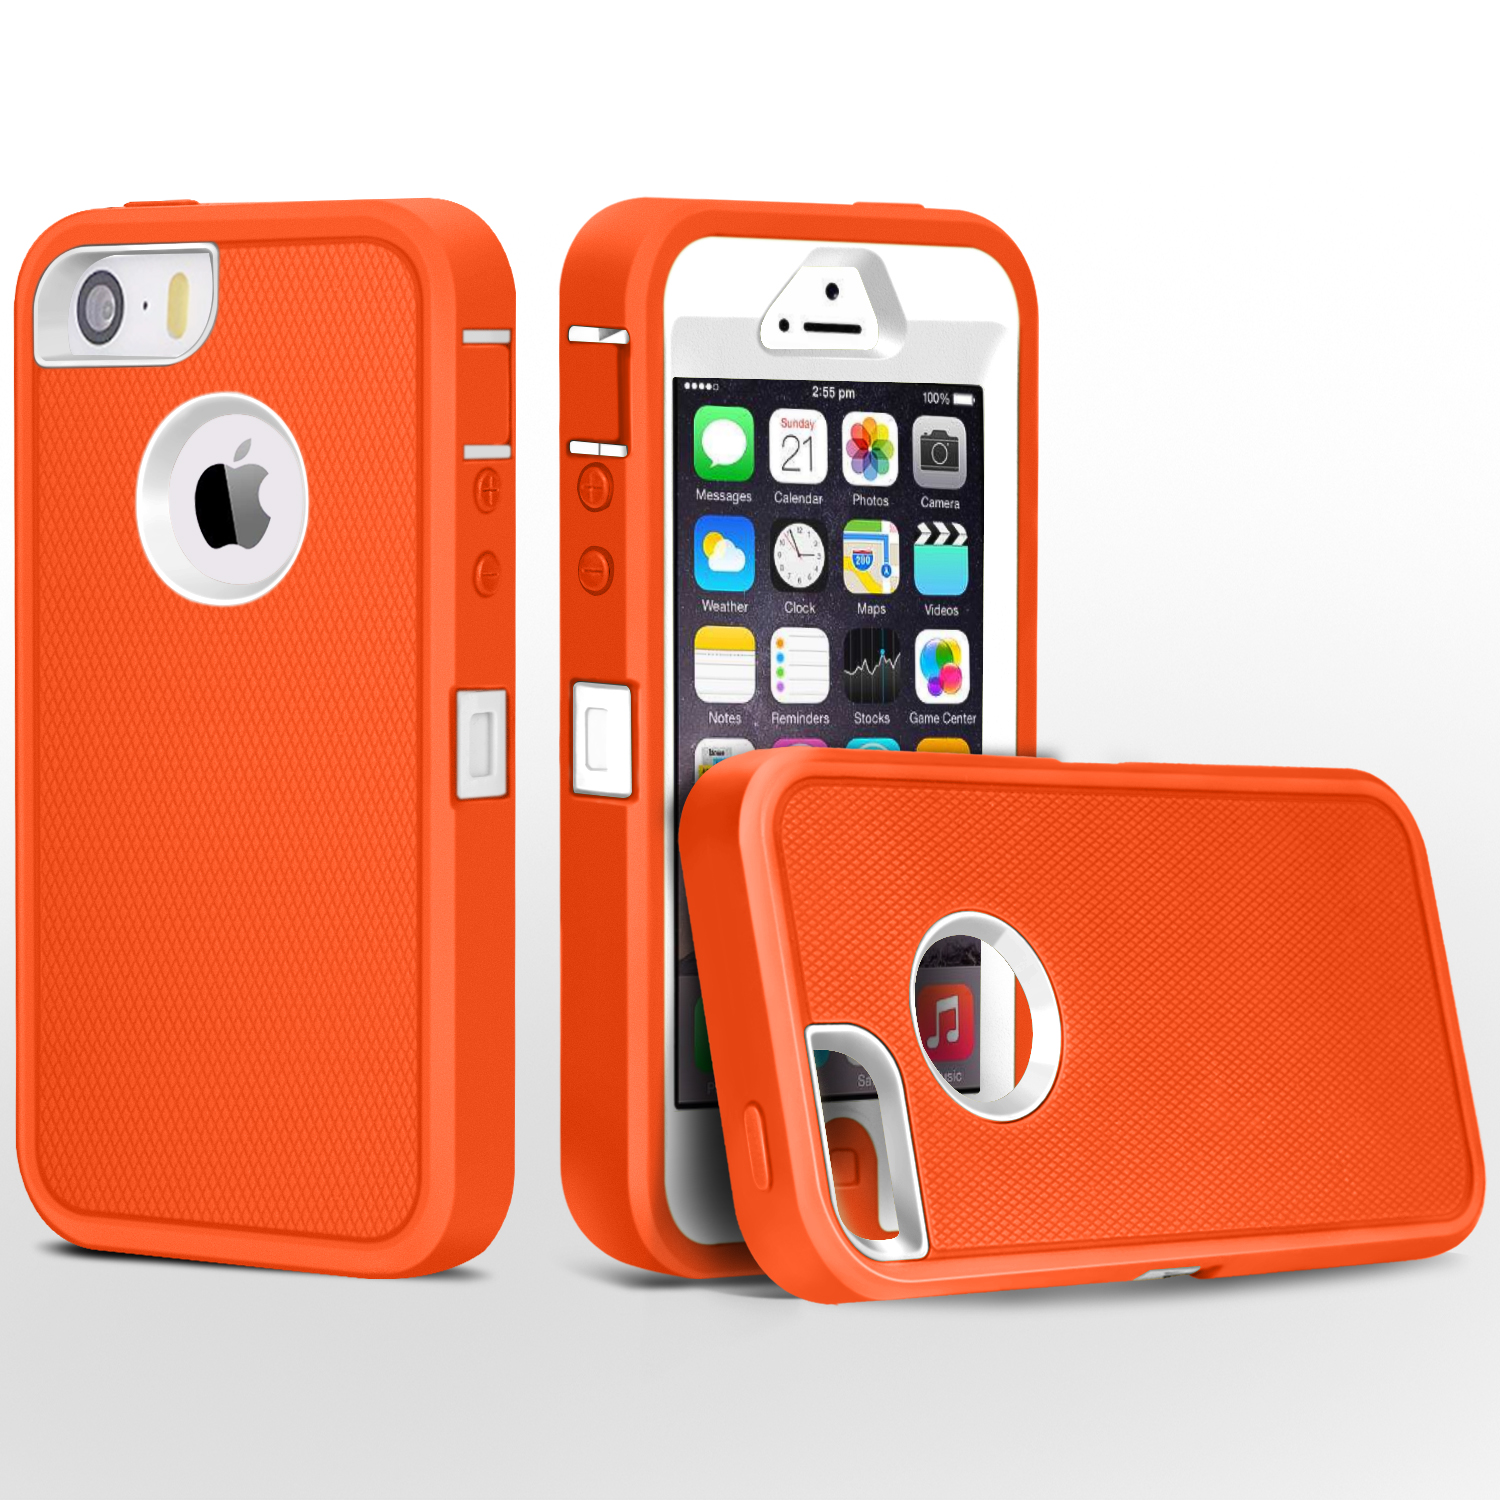 iPhone 5 Case, FogeekHeavy Duty PC + TPU Combo Protective Defender Body Armor Case for iPhone 5 & iPhone 5S(Orange/White) …